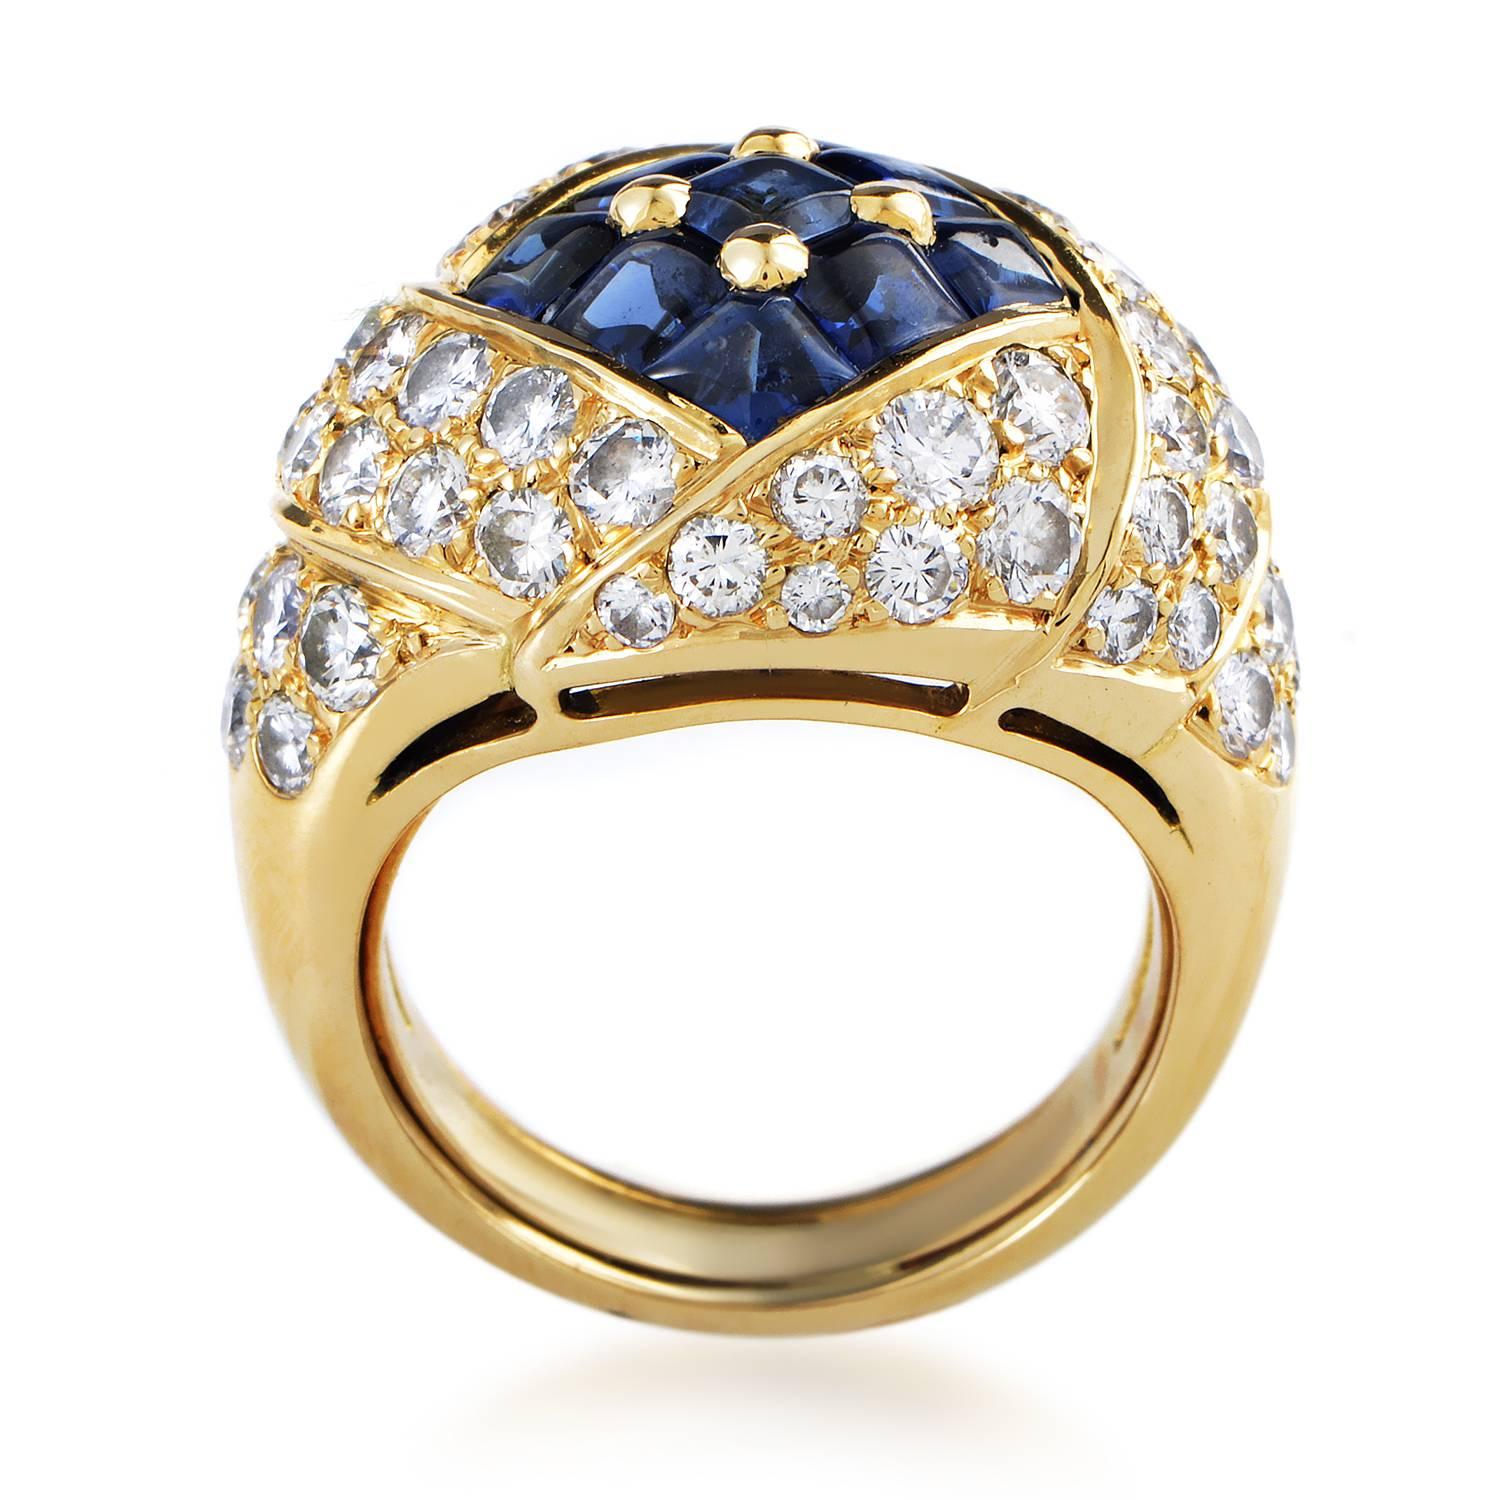 Producing a strong spirit of regal elegance and prestigious luster, this amazing ring from Piaget combines 18K yellow gold with magnificently sparkling diamonds weighing in total approximately 3.50ct and splendid sapphires totaling approximately